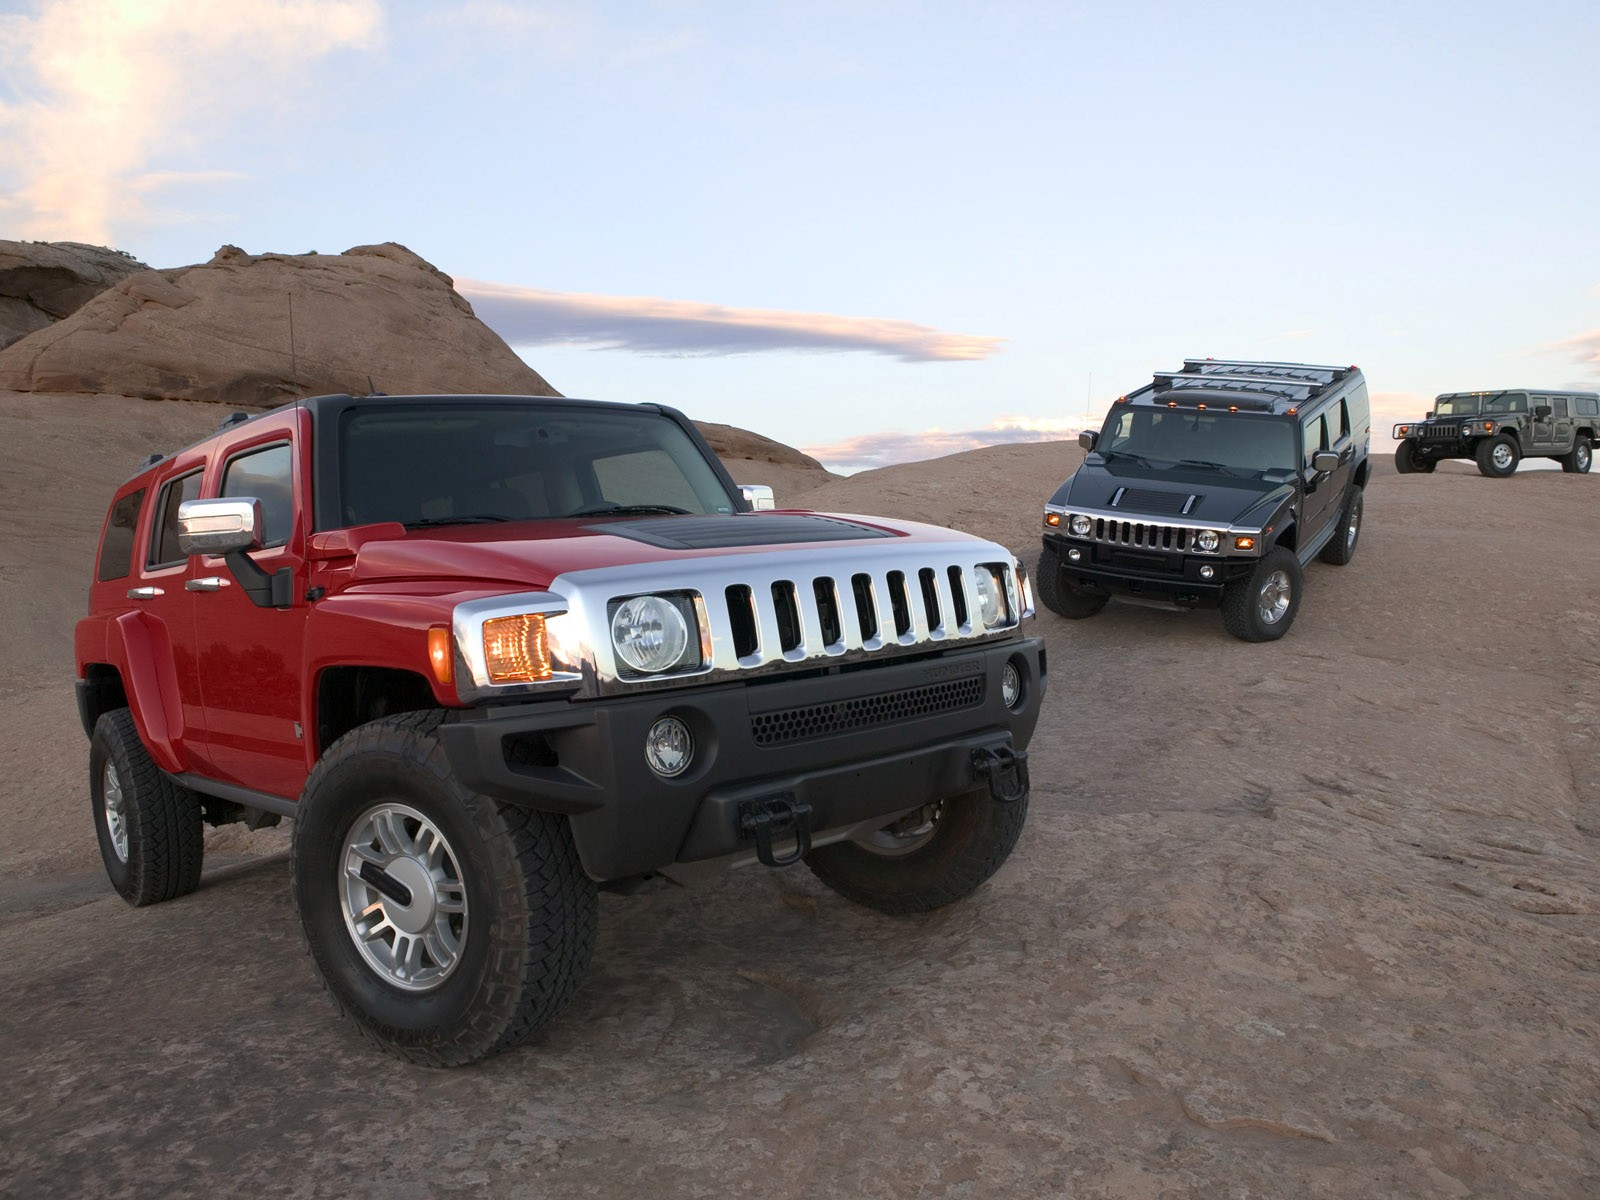 Hummer H3 Wallpapers